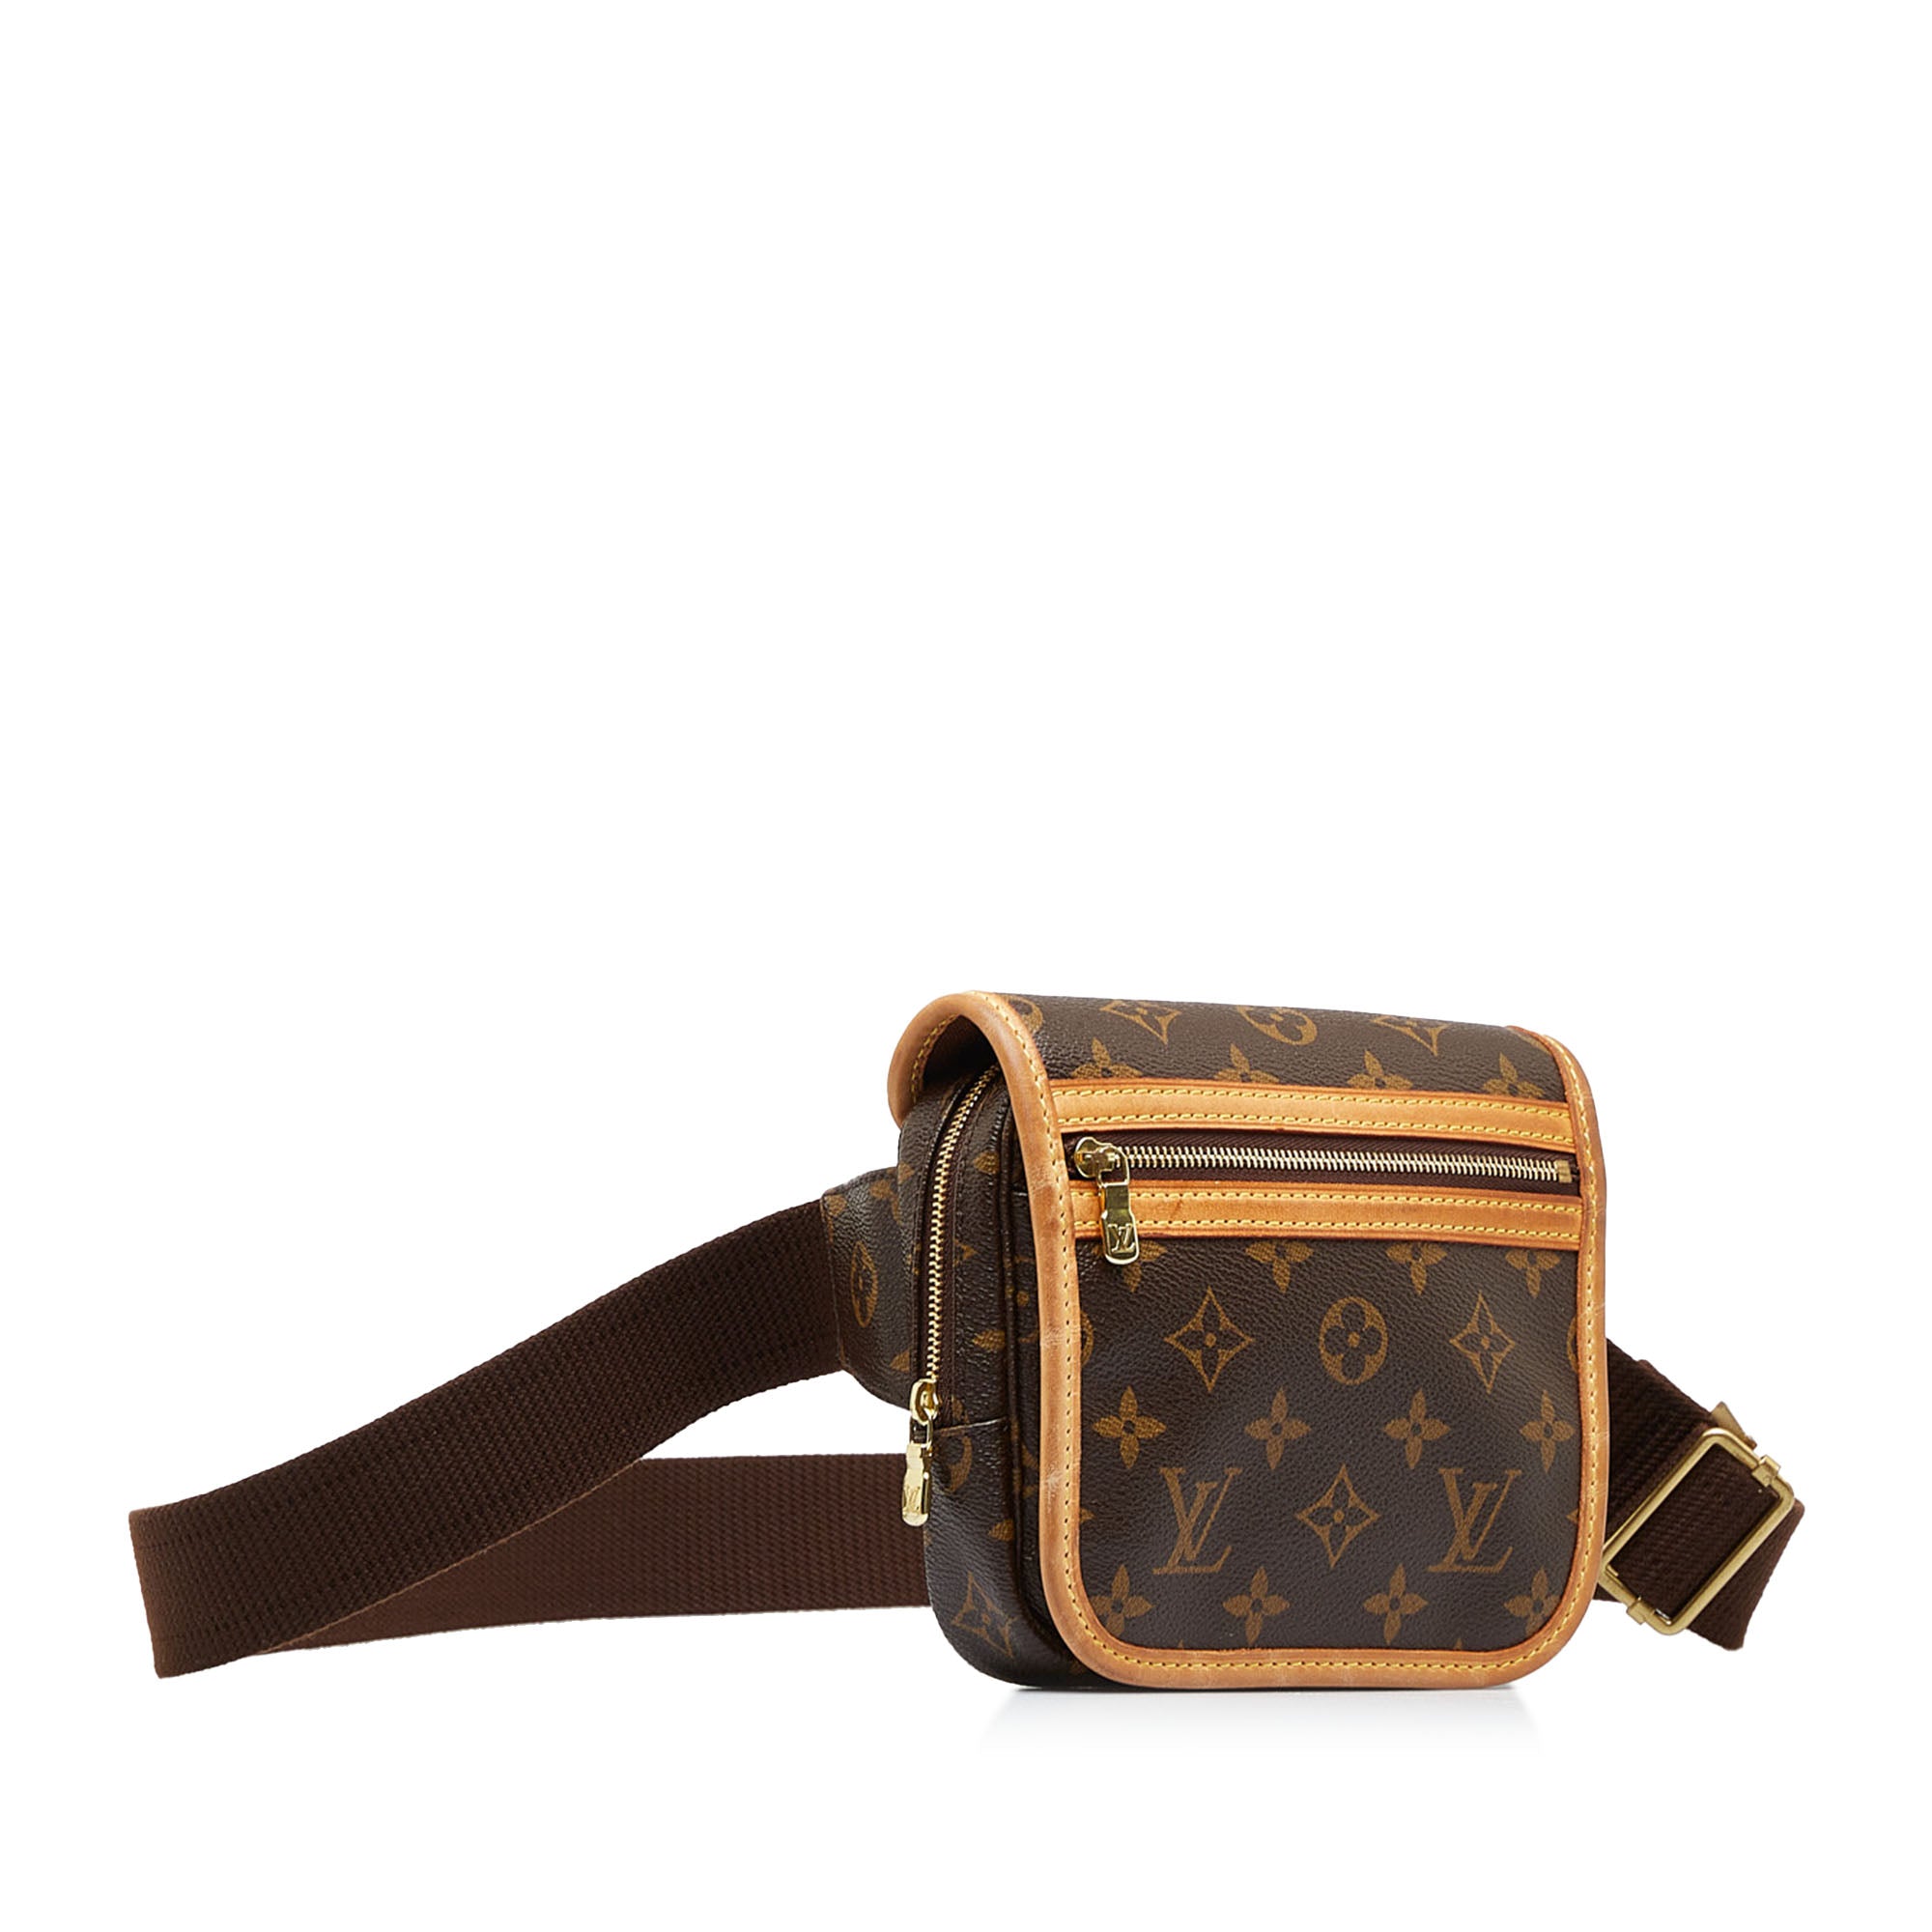 Shop for Louis Vuitton Monogram Canvas Leather Bosphore Waist Bag - Shipped  from USA